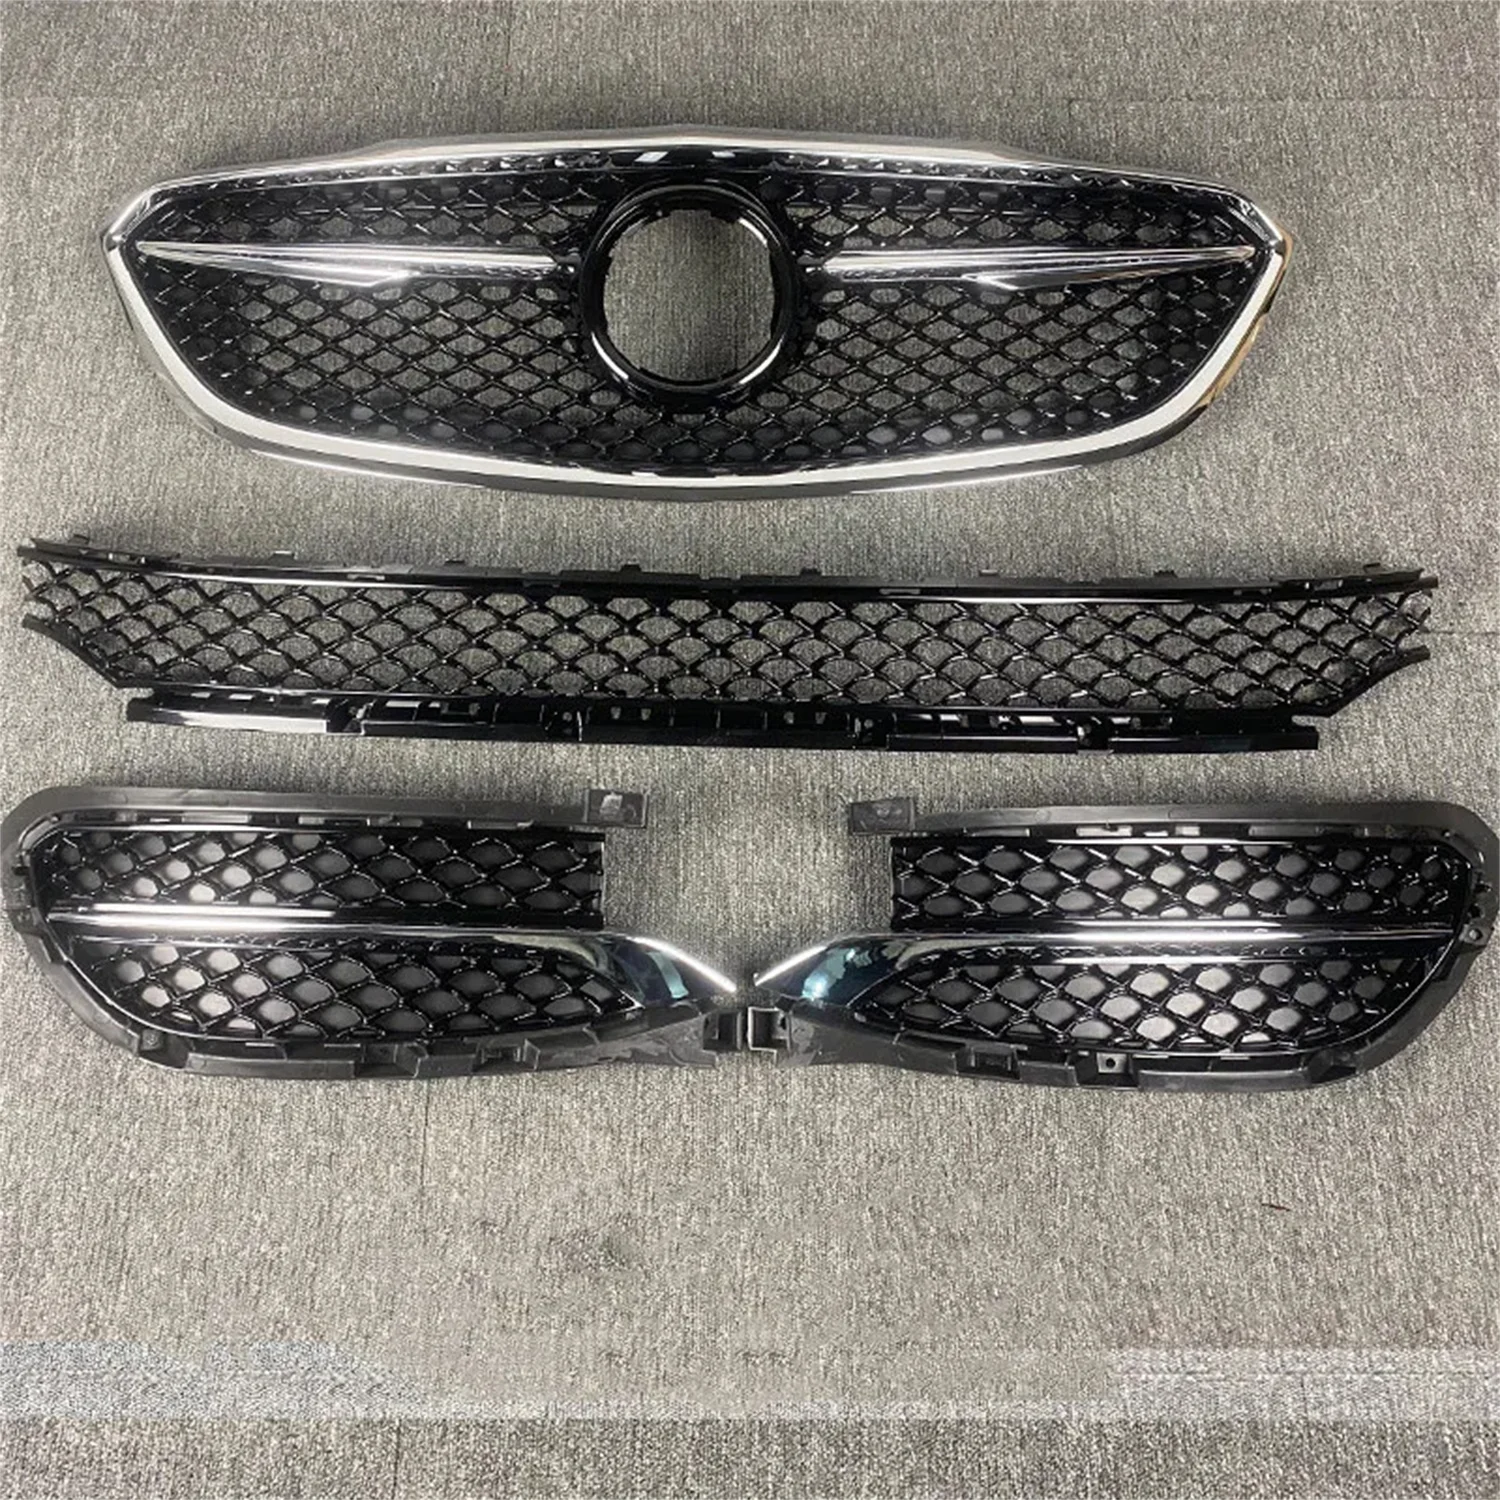 

Car Front Bumper Radiator Mesh Grill down Grille Racing Grills for Buick LaCrosse Avenir 2016-2018